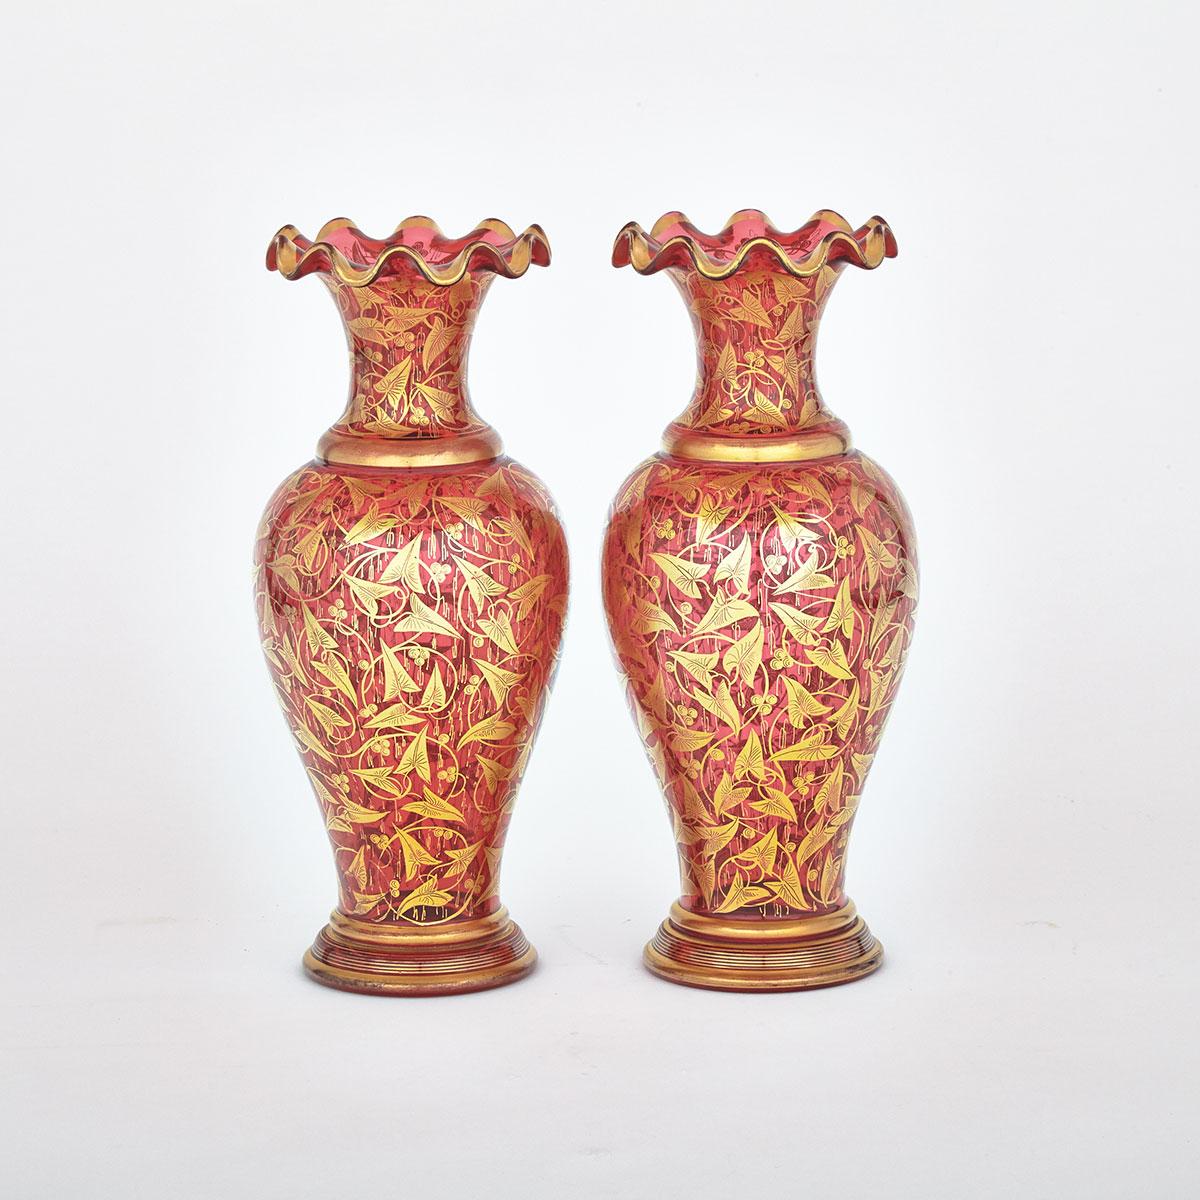 Pair of English Red Glass Vases, c.1860